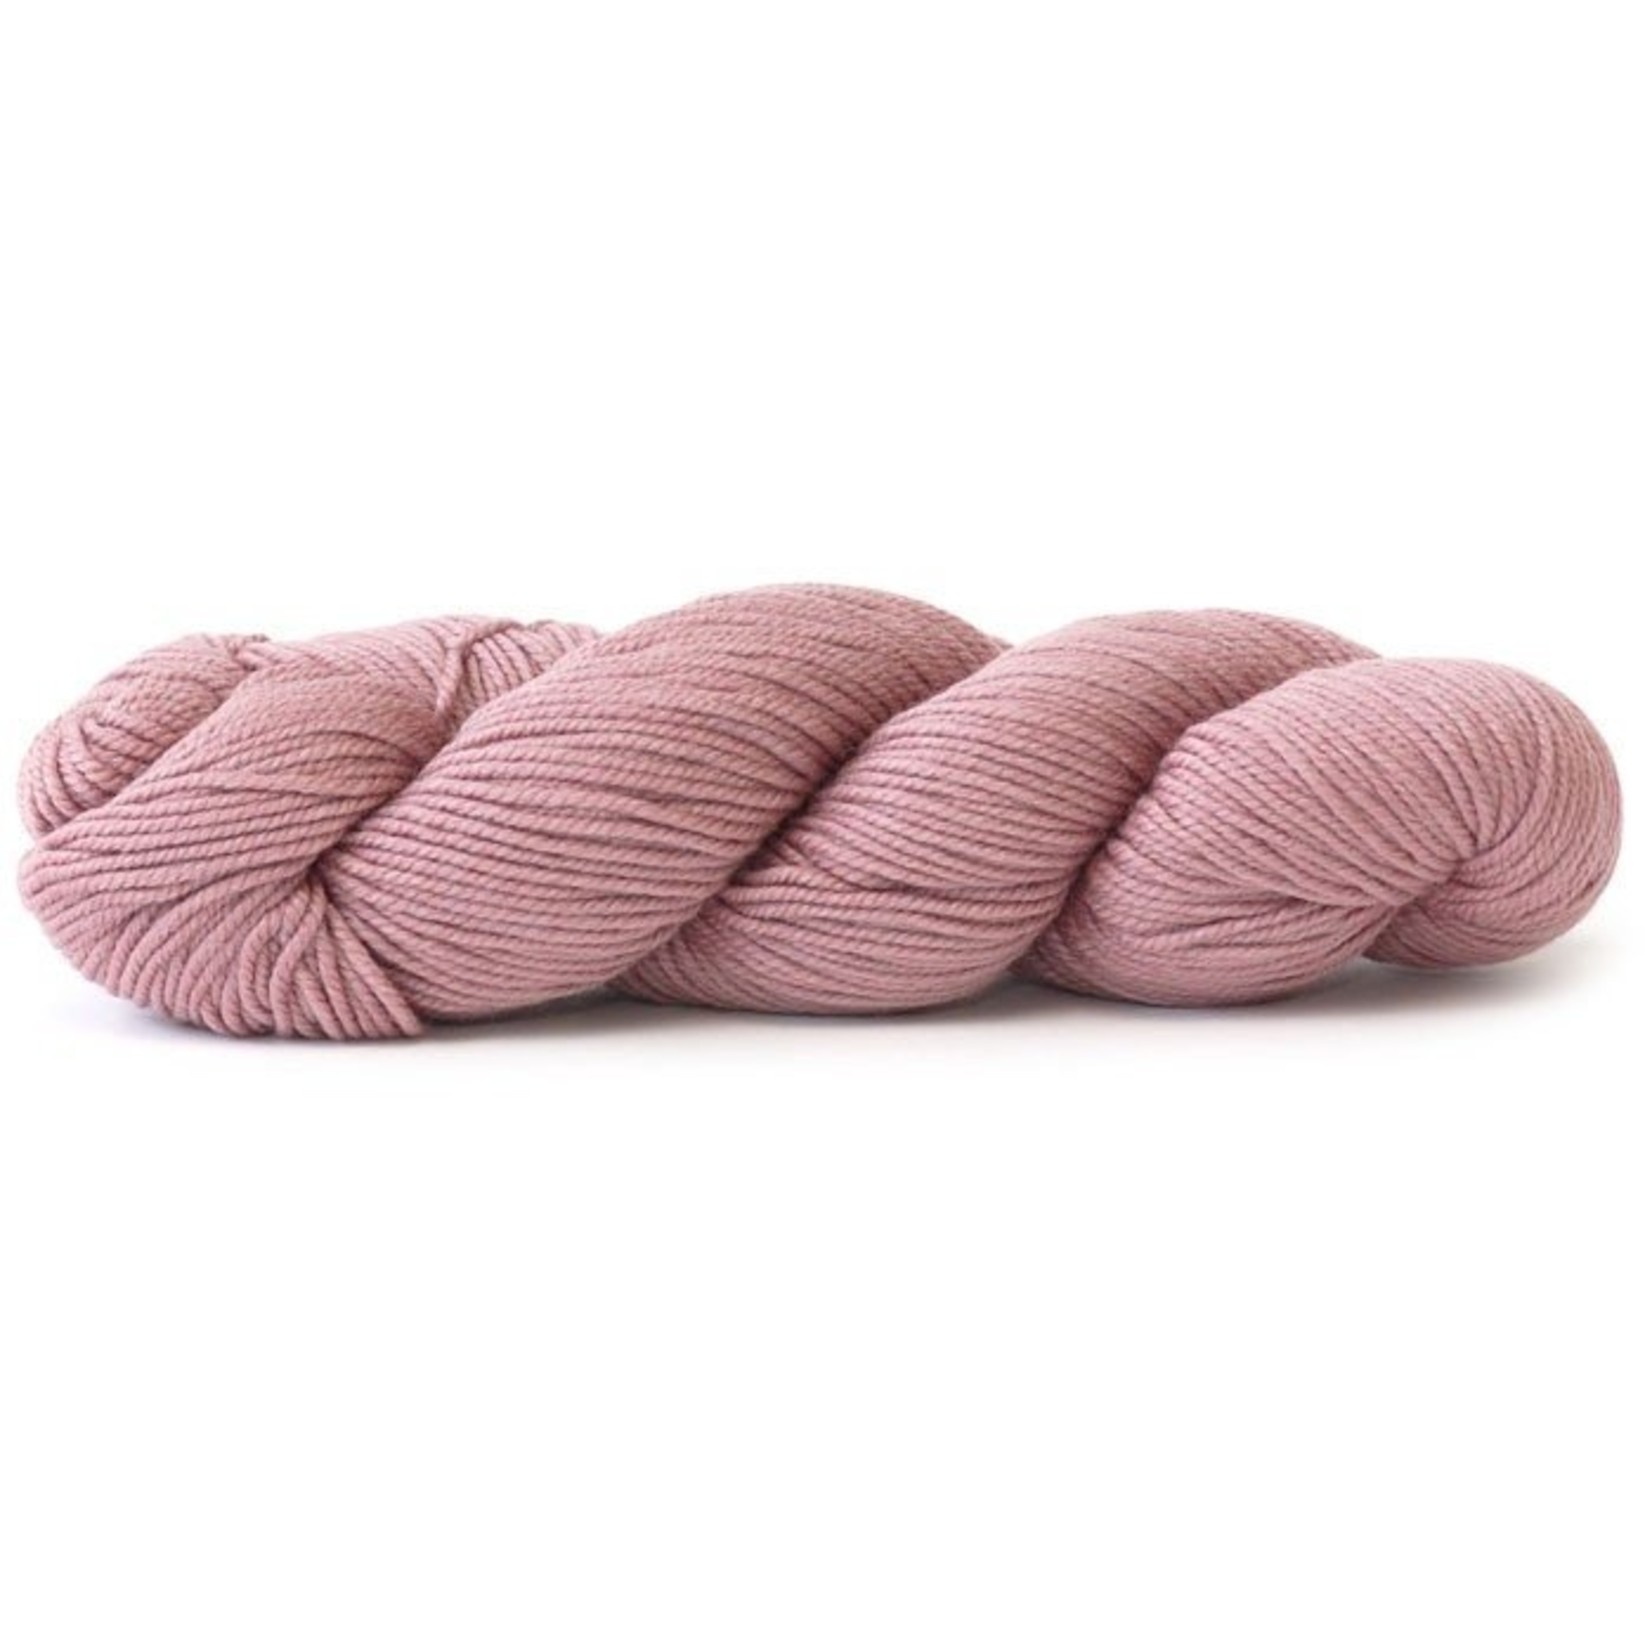 Skacel Collection Sueno Worsted, 1352, Dusty Rose